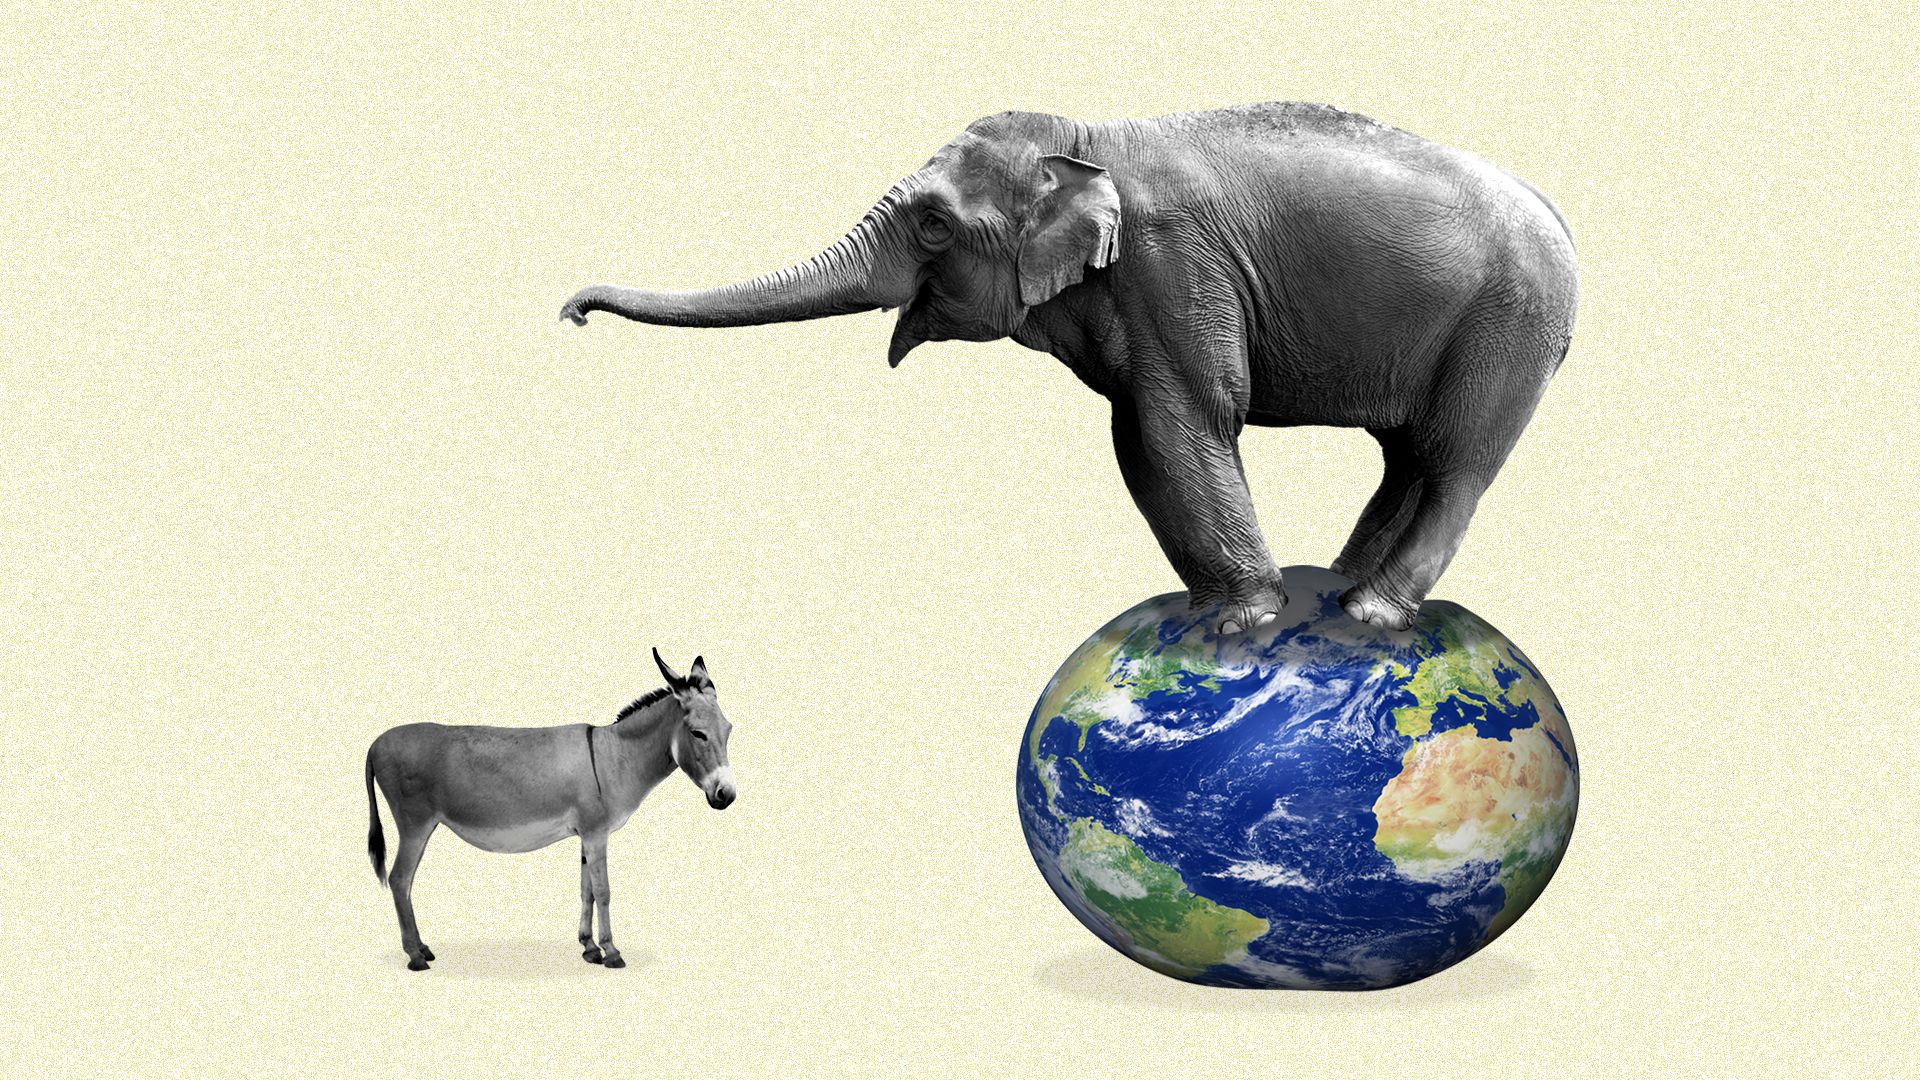 An illustration of an elephant standing on the world and a small donkey next to it